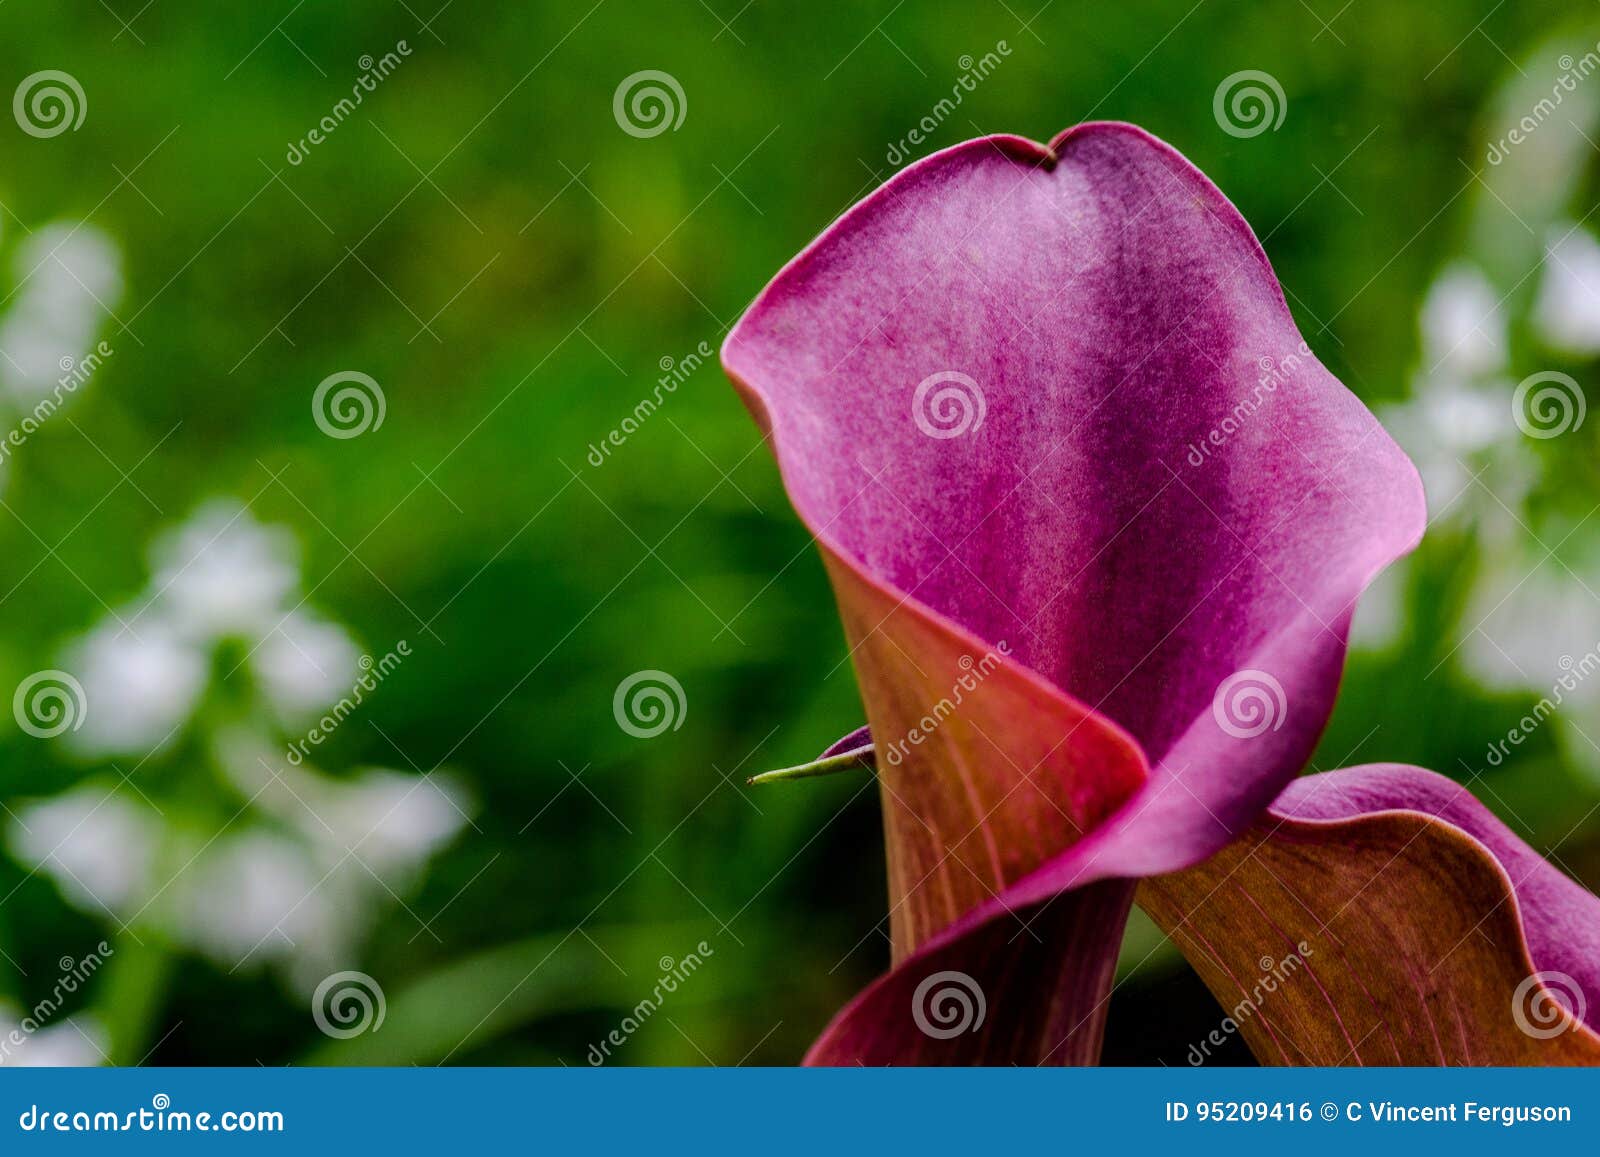 Maroon Calla Lily stock photo. Image of floral, nature - 95209416